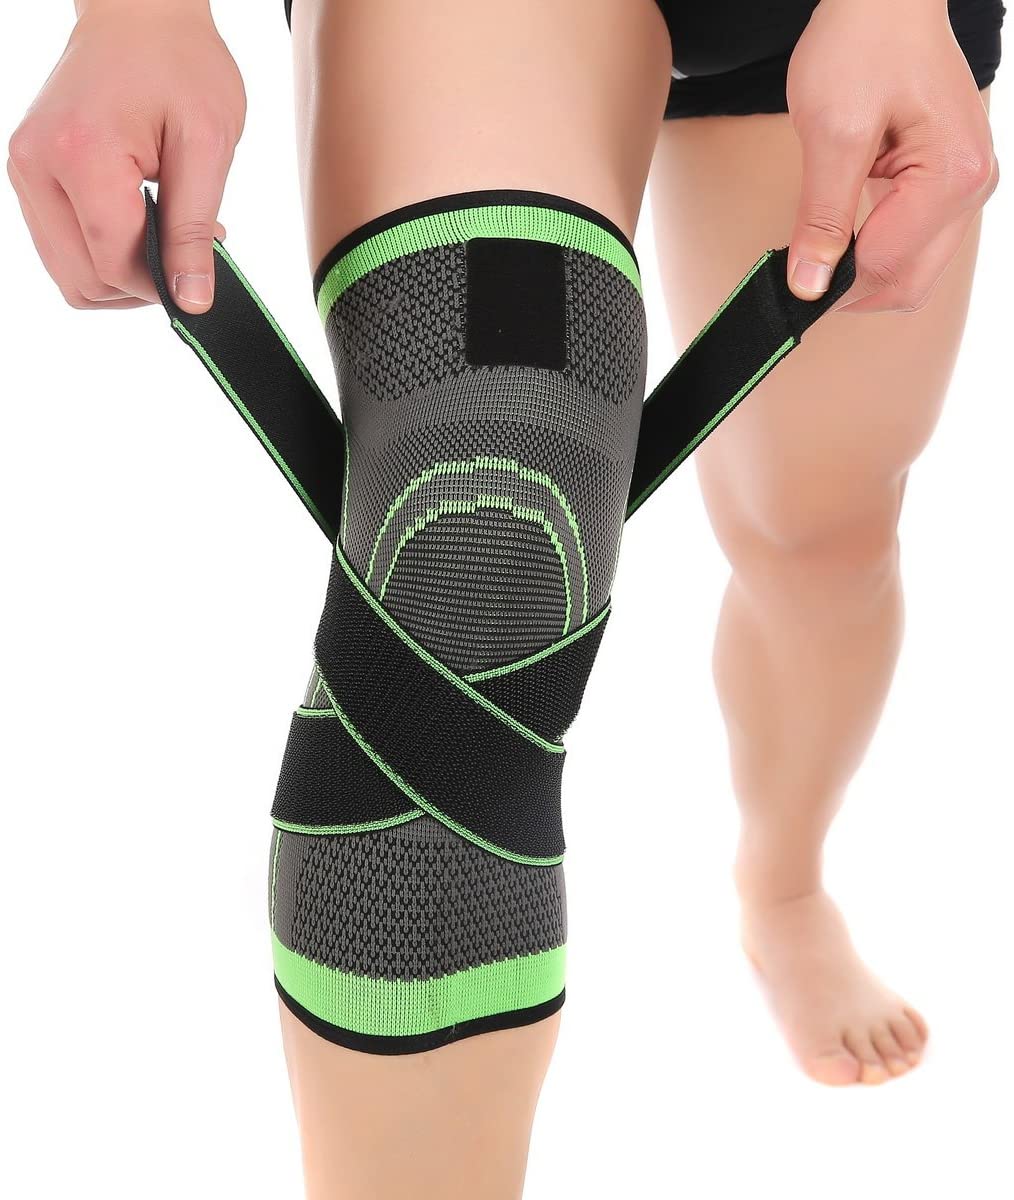 3D Knee Brace, Compression Knee Sleeve Sports Knee Pads with Men Women for  Joint Pain and Arthritis Relief, Provide Extra Support for Your Sports(M) 